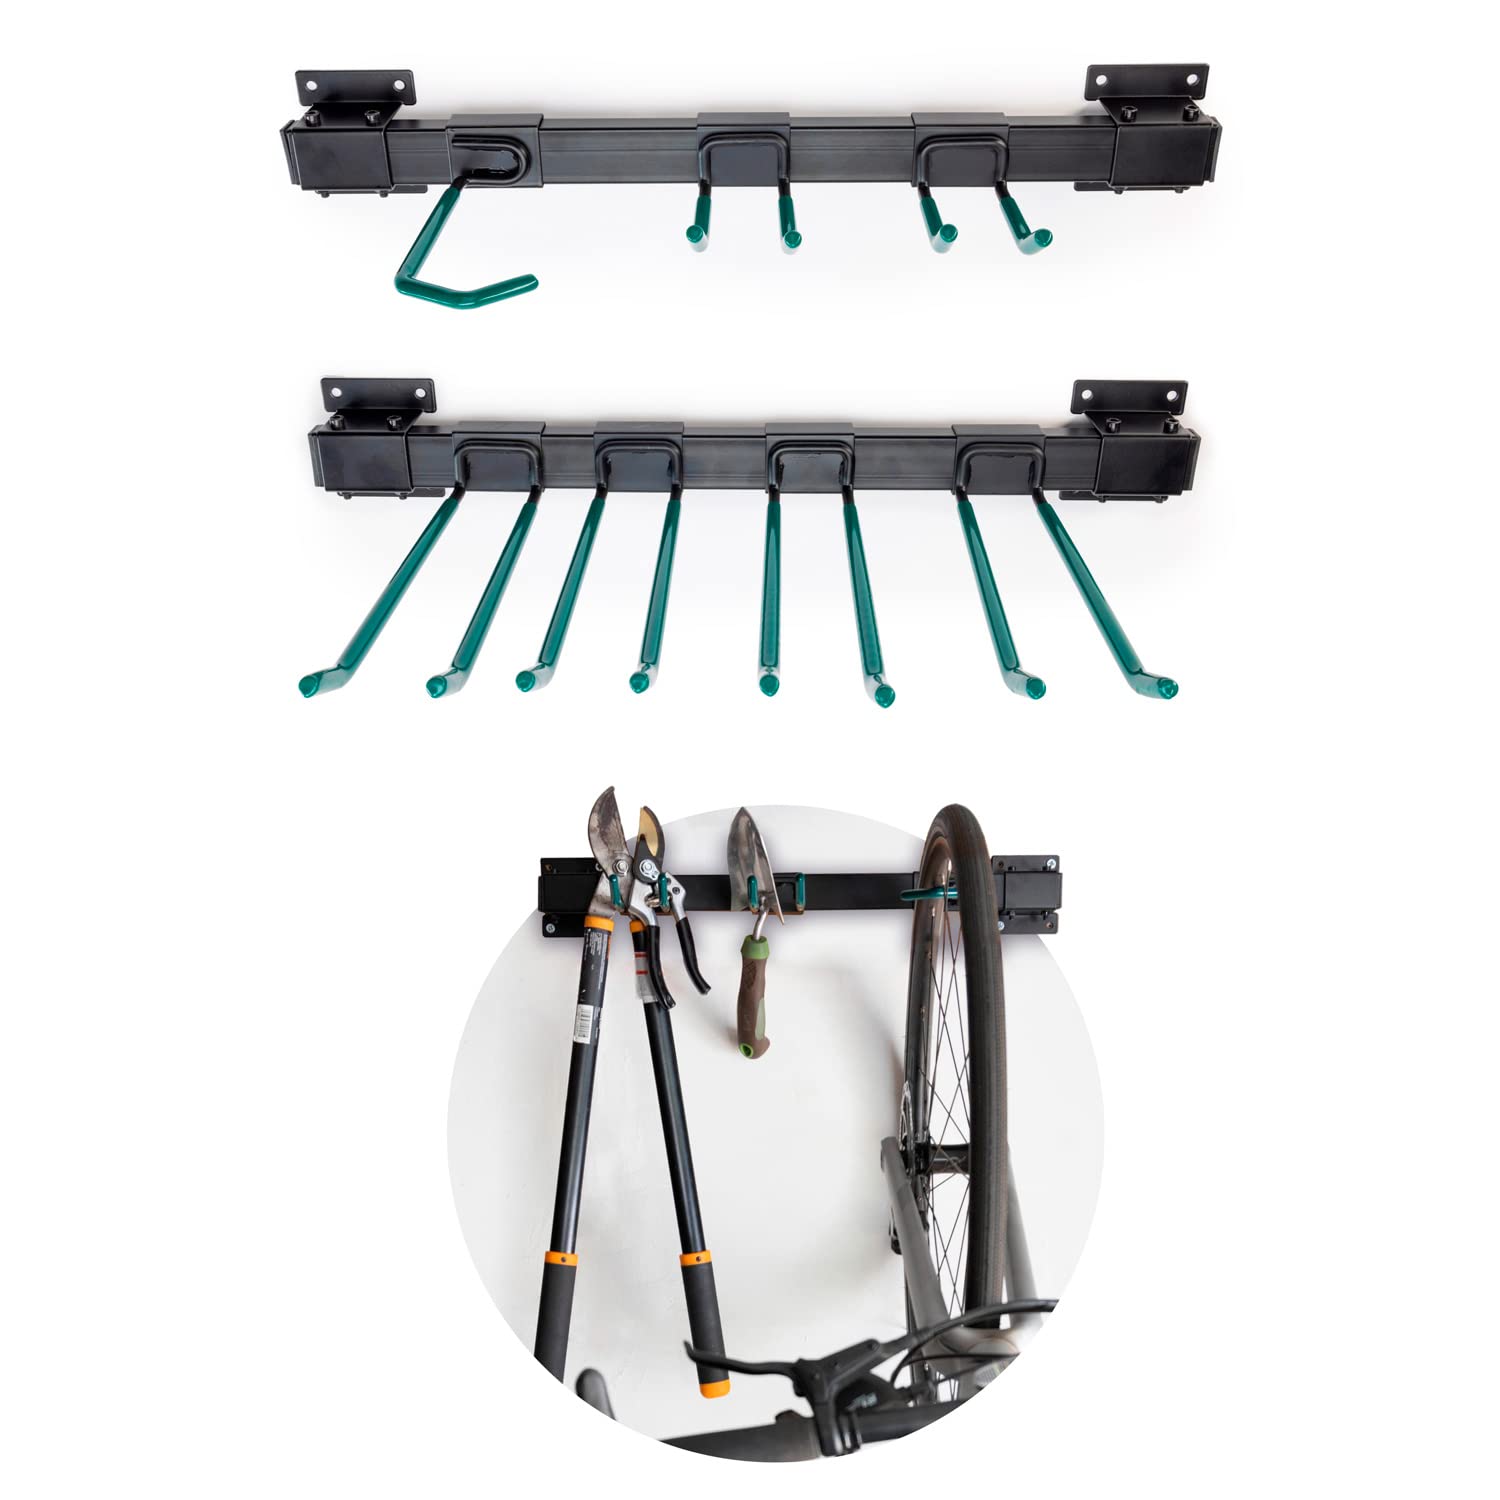 Garage Hooks, In Stock in U.S. One-day shipping